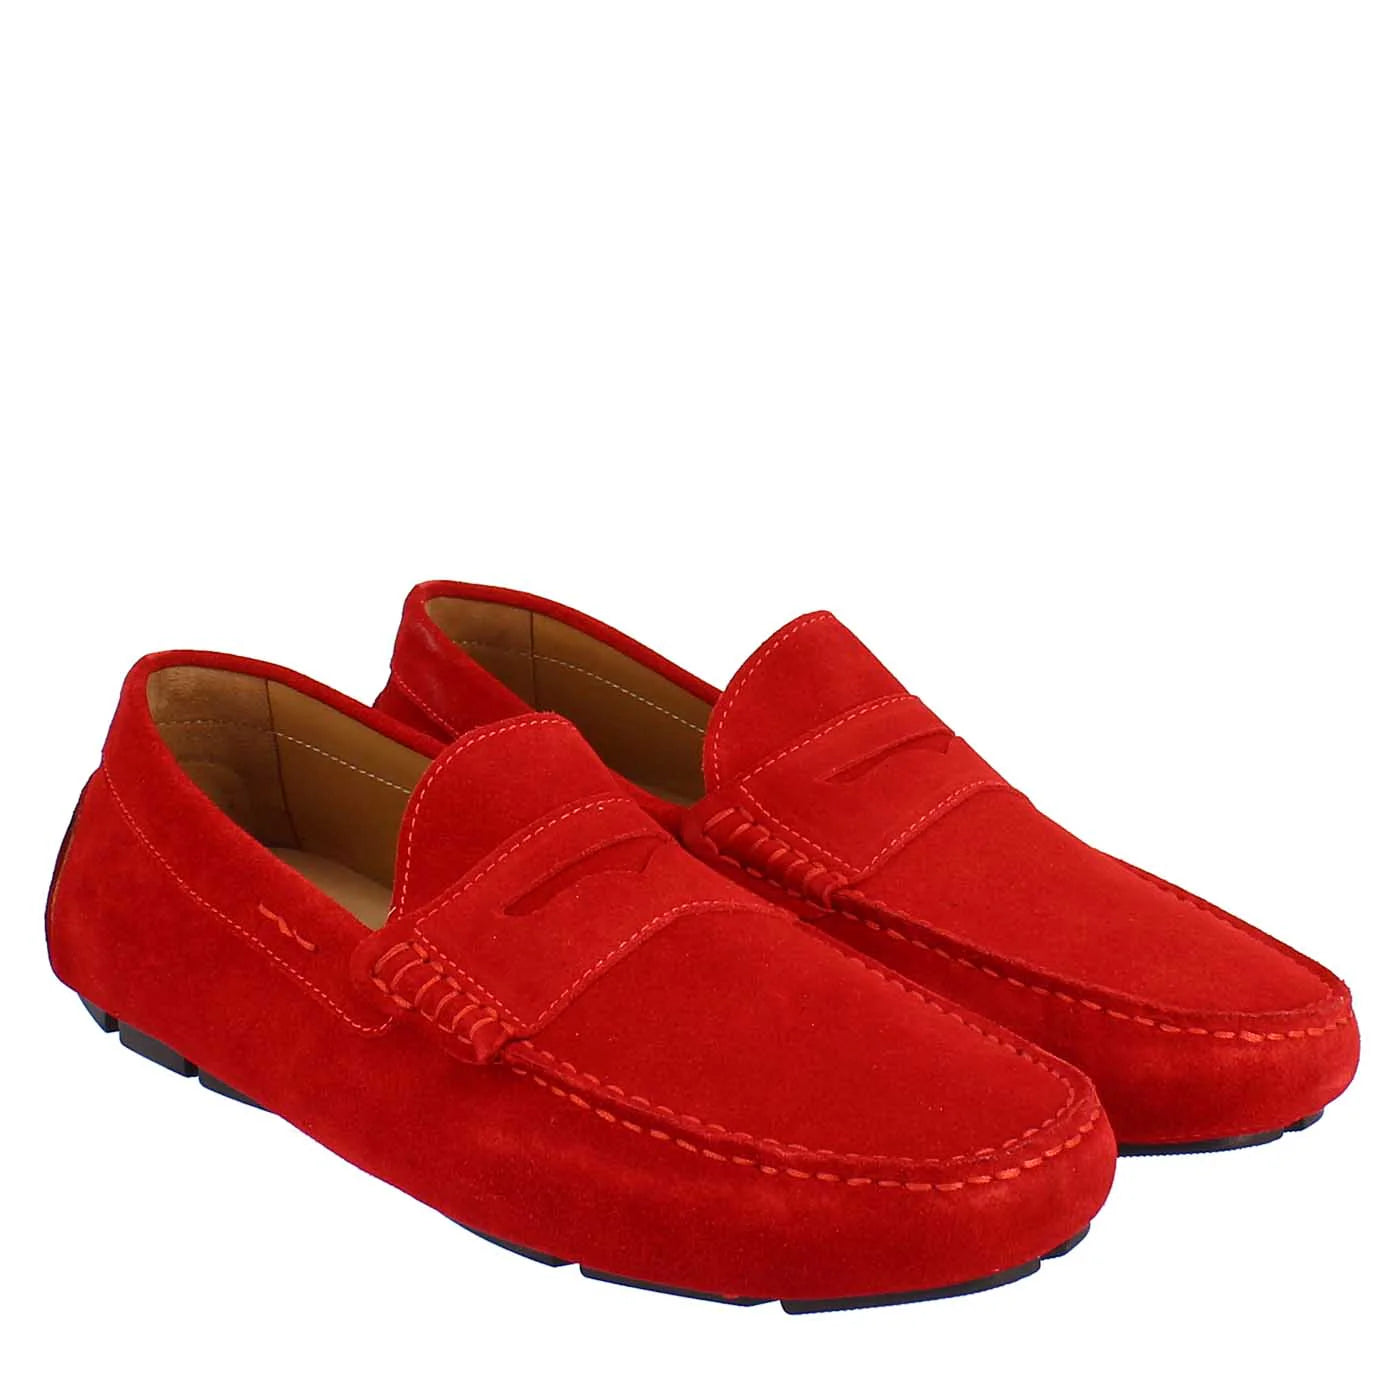 Red Handmade Carshoe Loafers